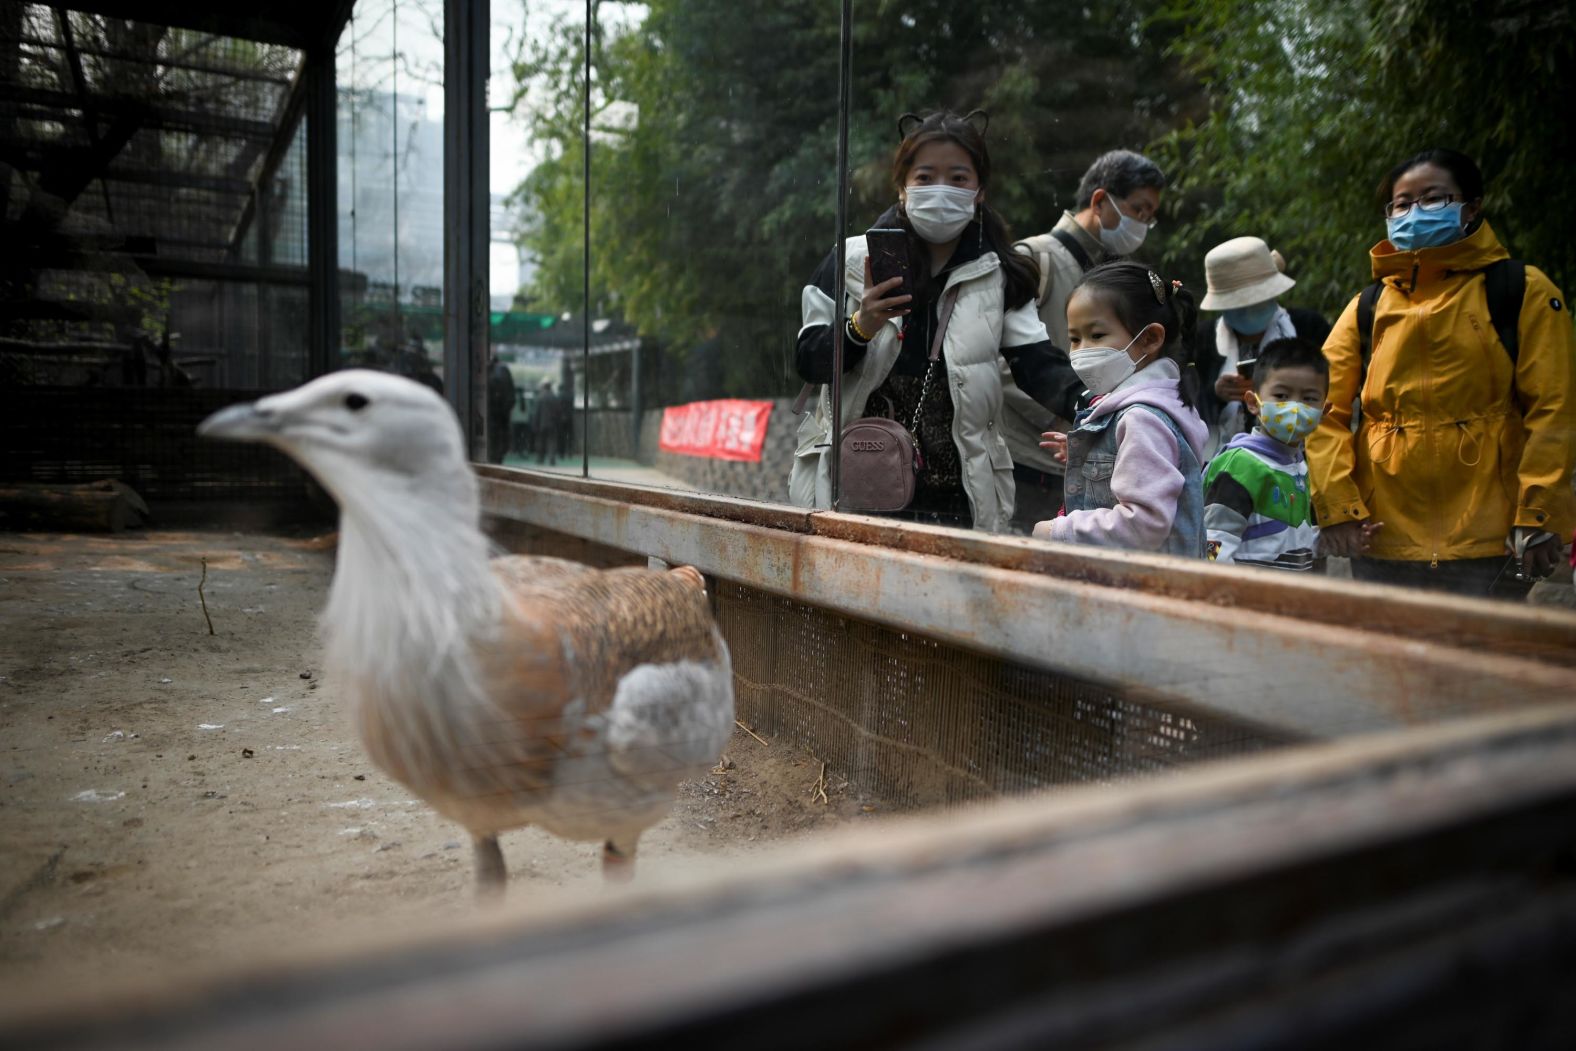 People visit the Beijing Zoo after it reopened its outdoor exhibits to the public.